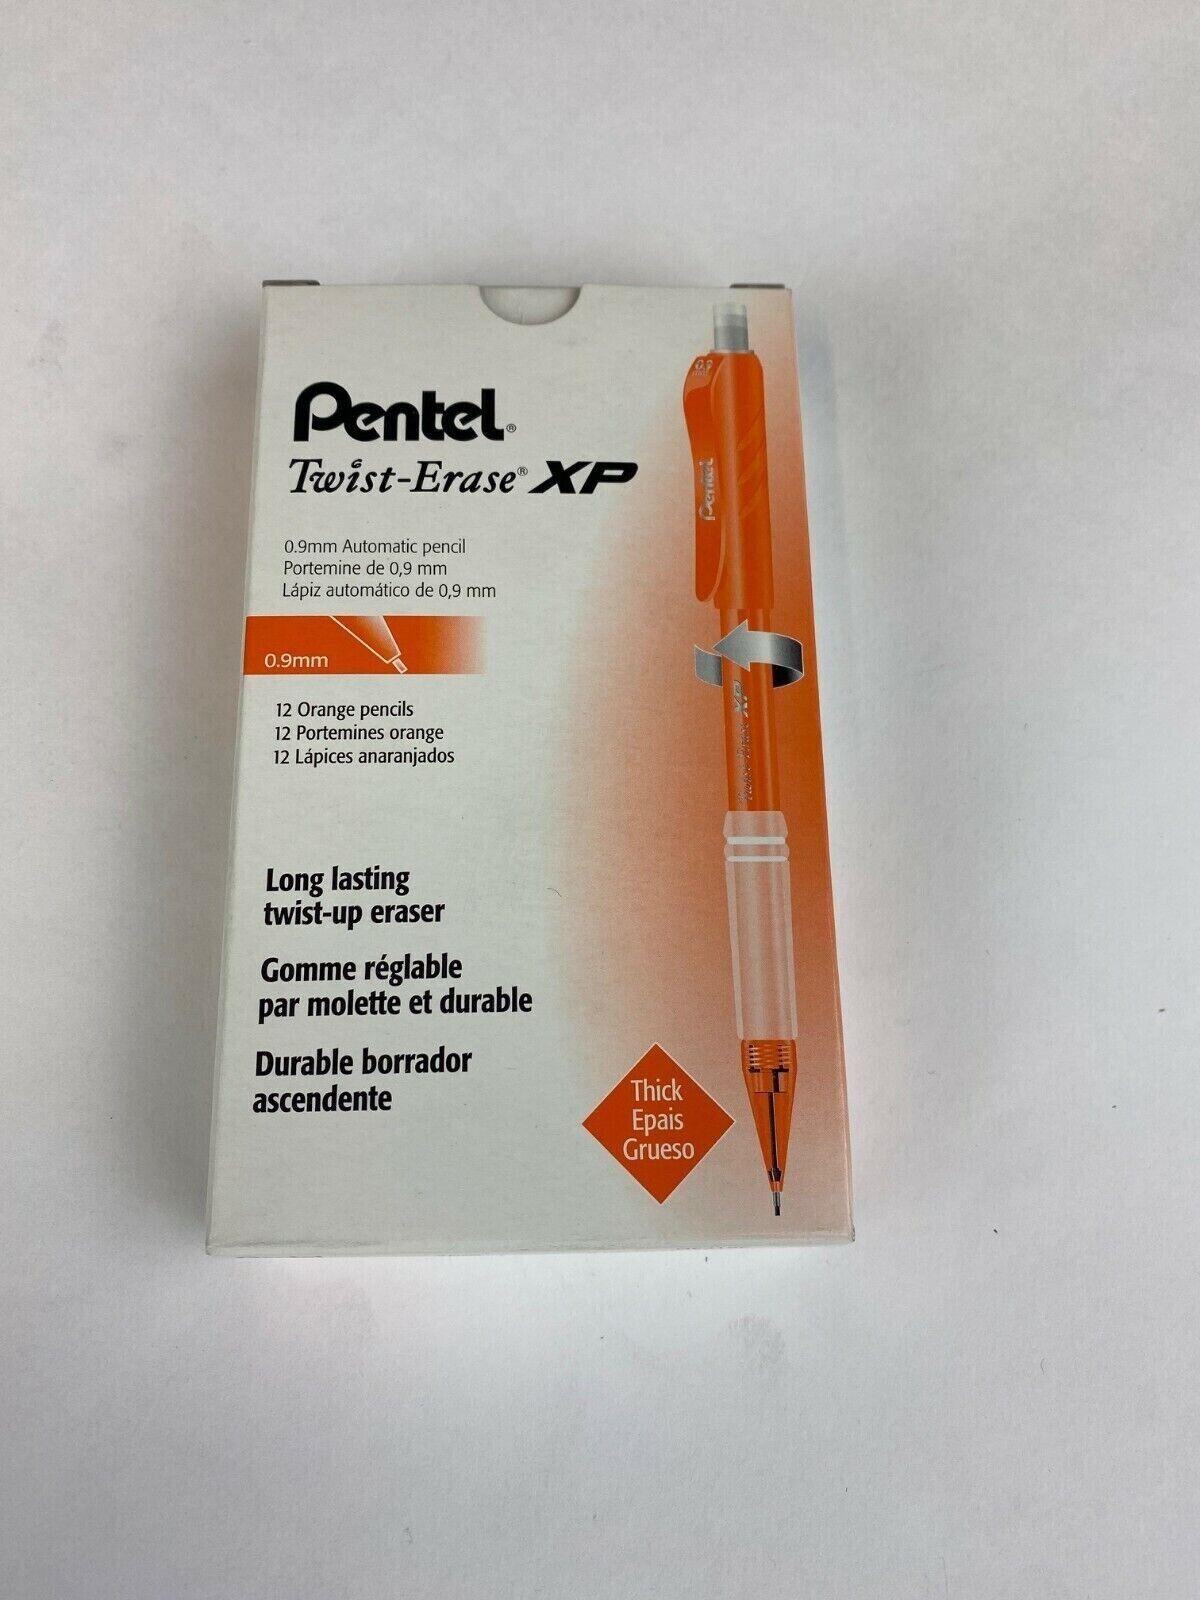 Pentel Twist-Erase XP Automatic Pencil with Lead and Eraser 0.9mm 12 pack QE419F